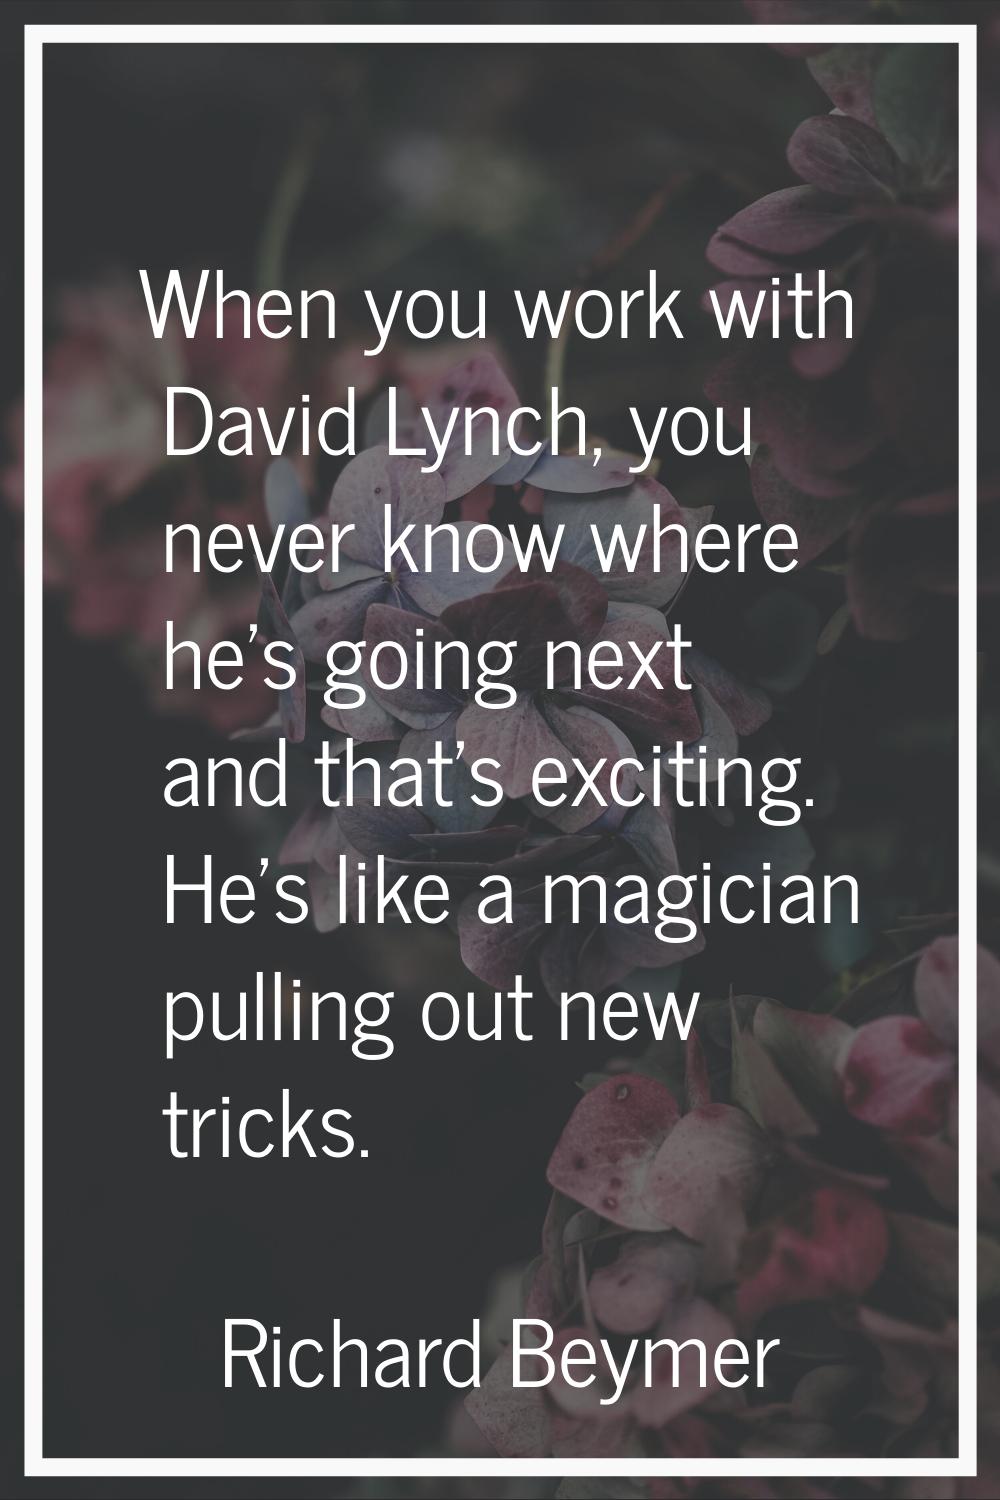 When you work with David Lynch, you never know where he's going next and that's exciting. He's like